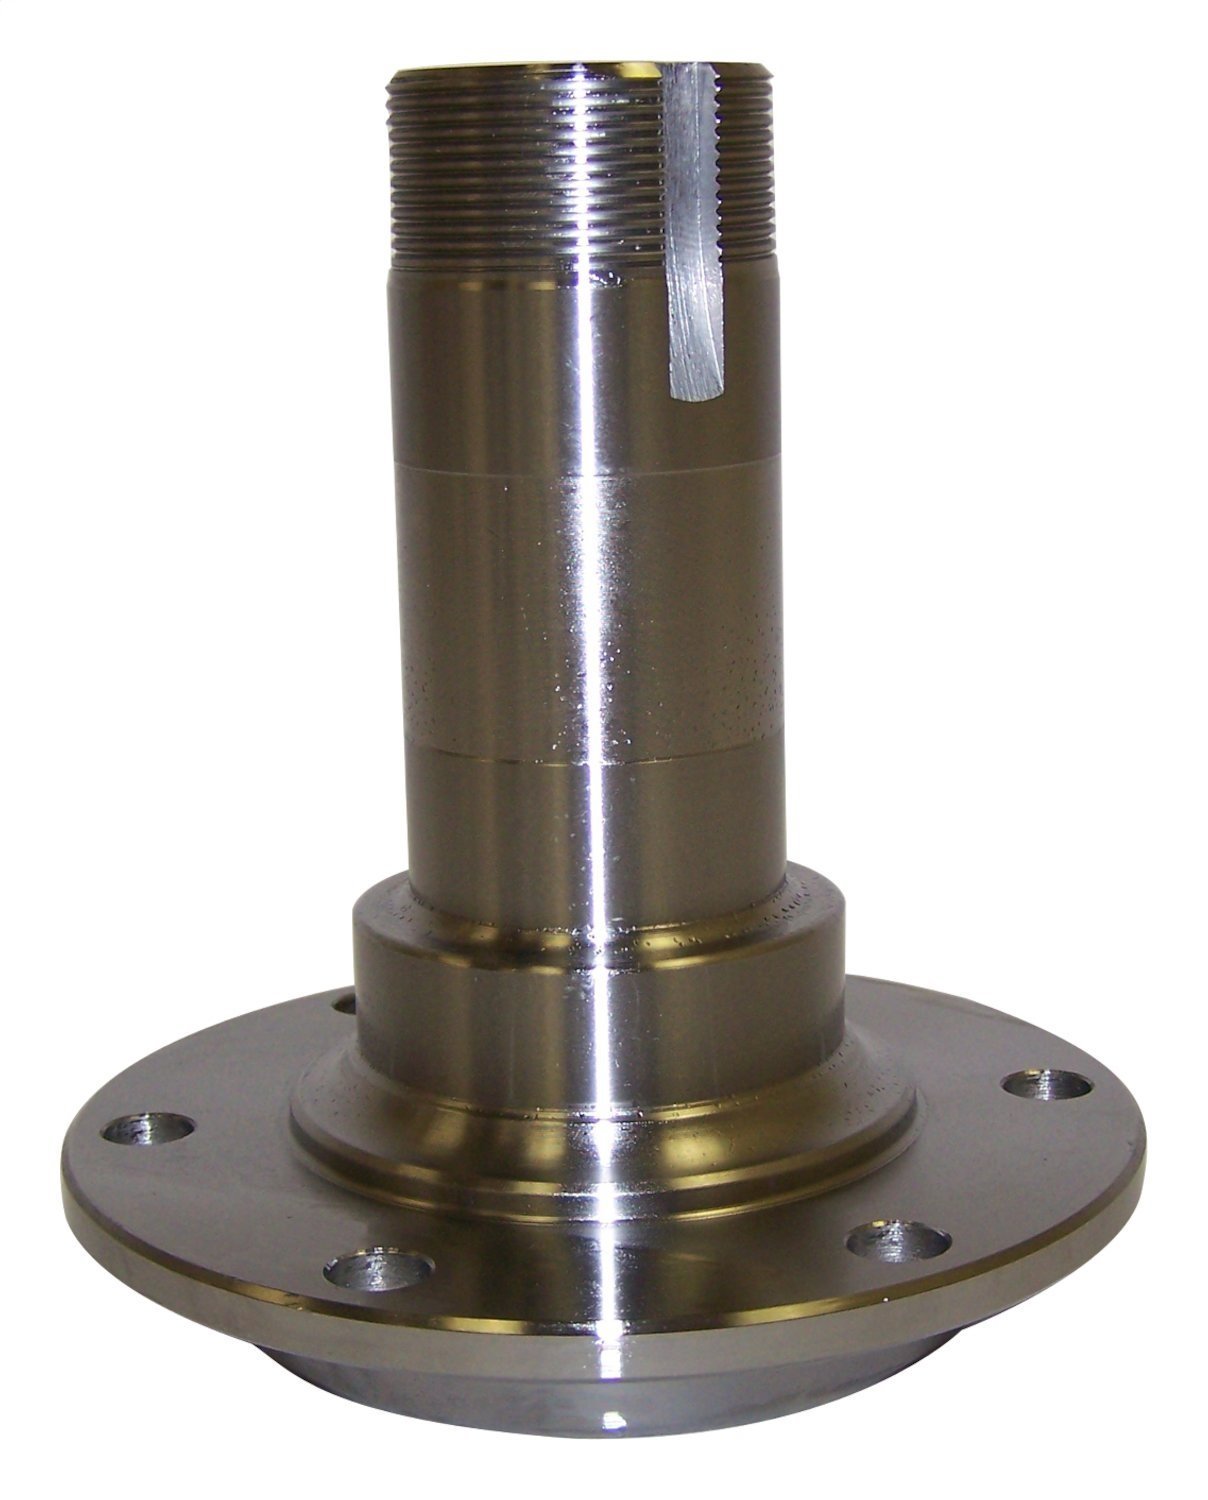 Axle Spindle